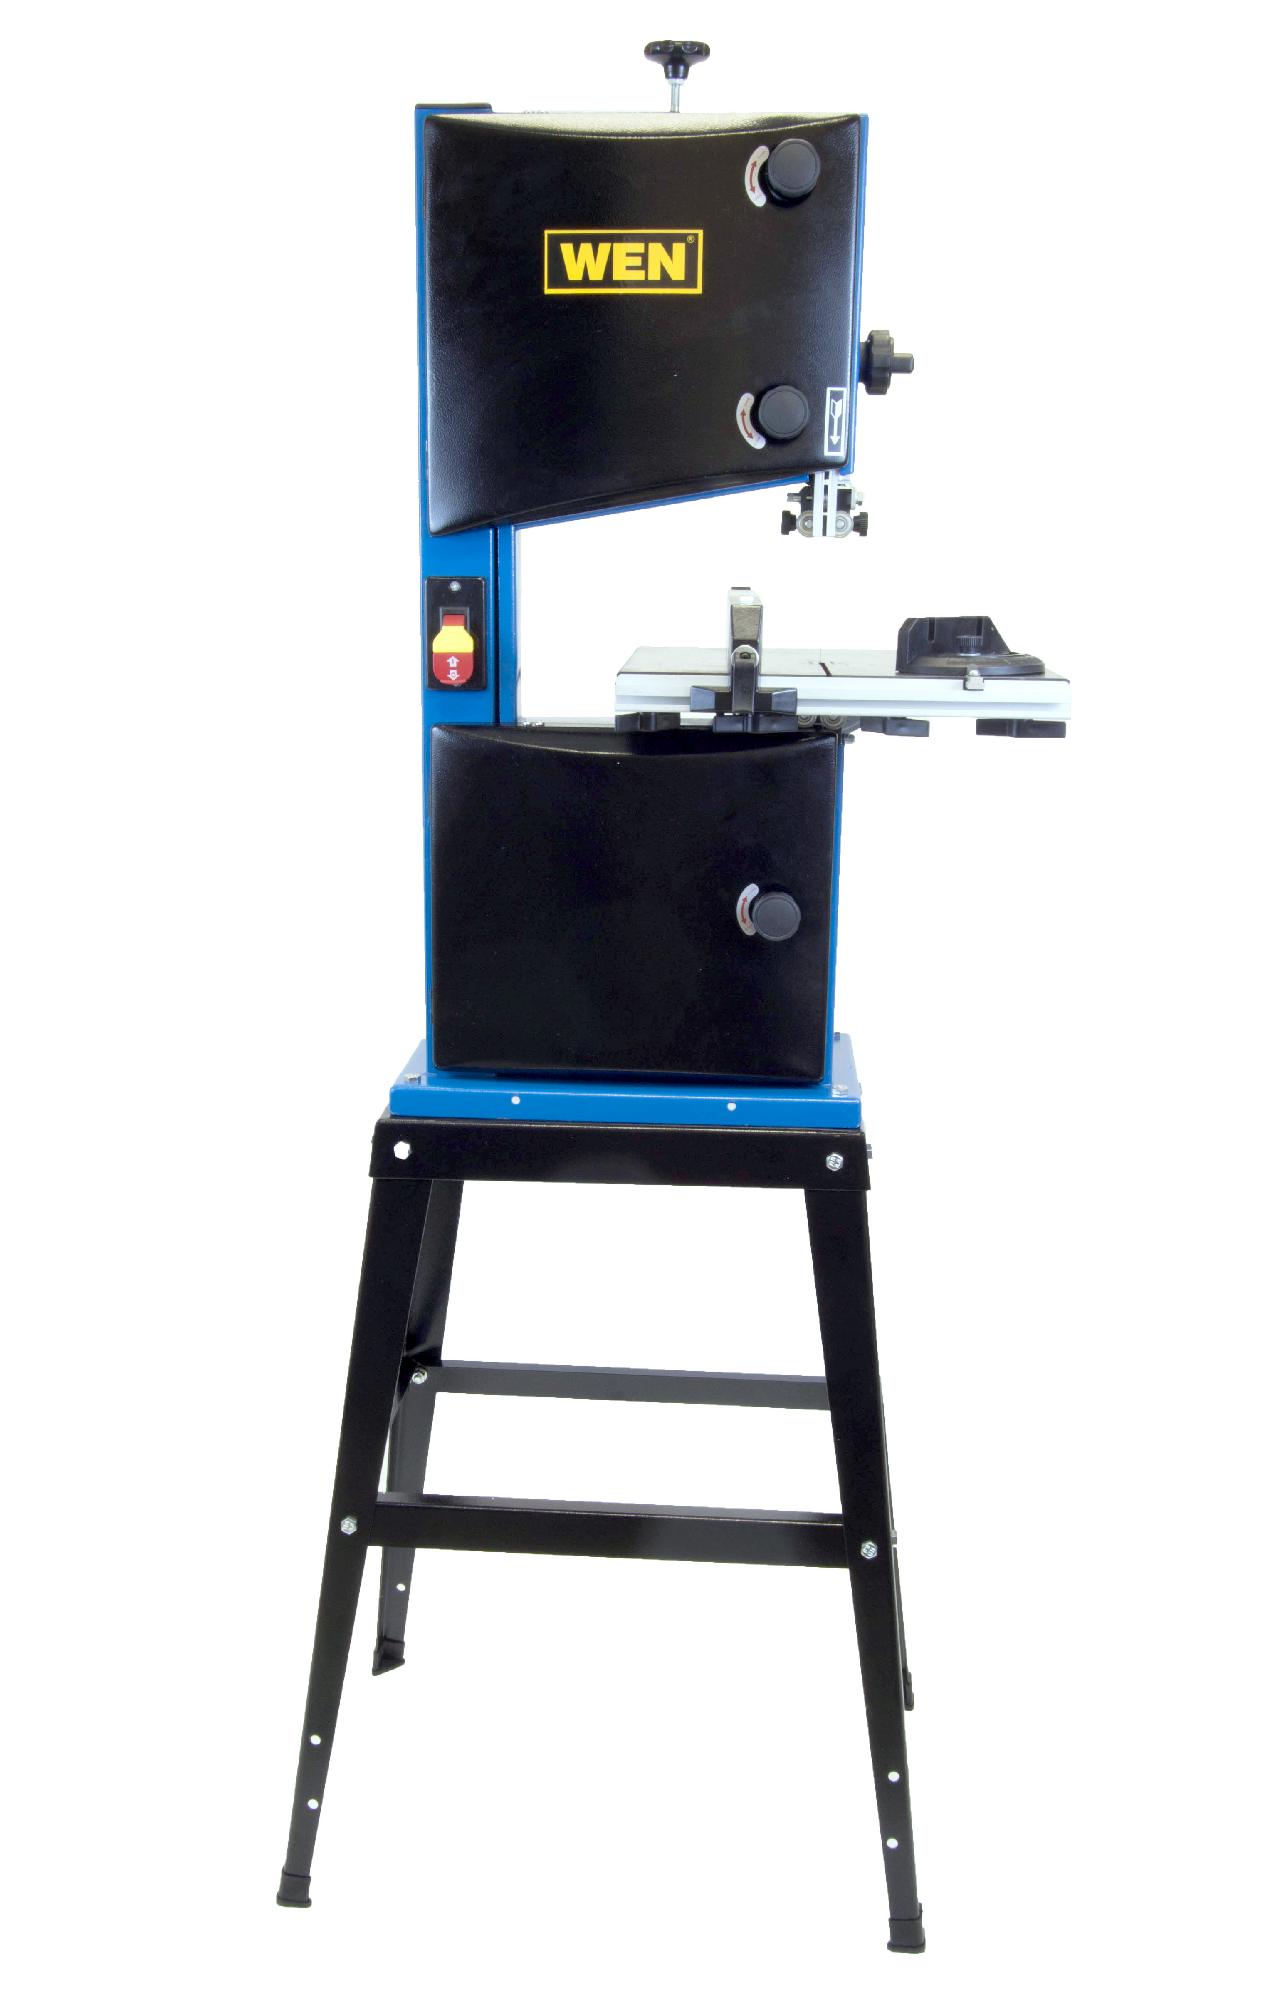 WEN Professional 10-inch Band Saw with Stand